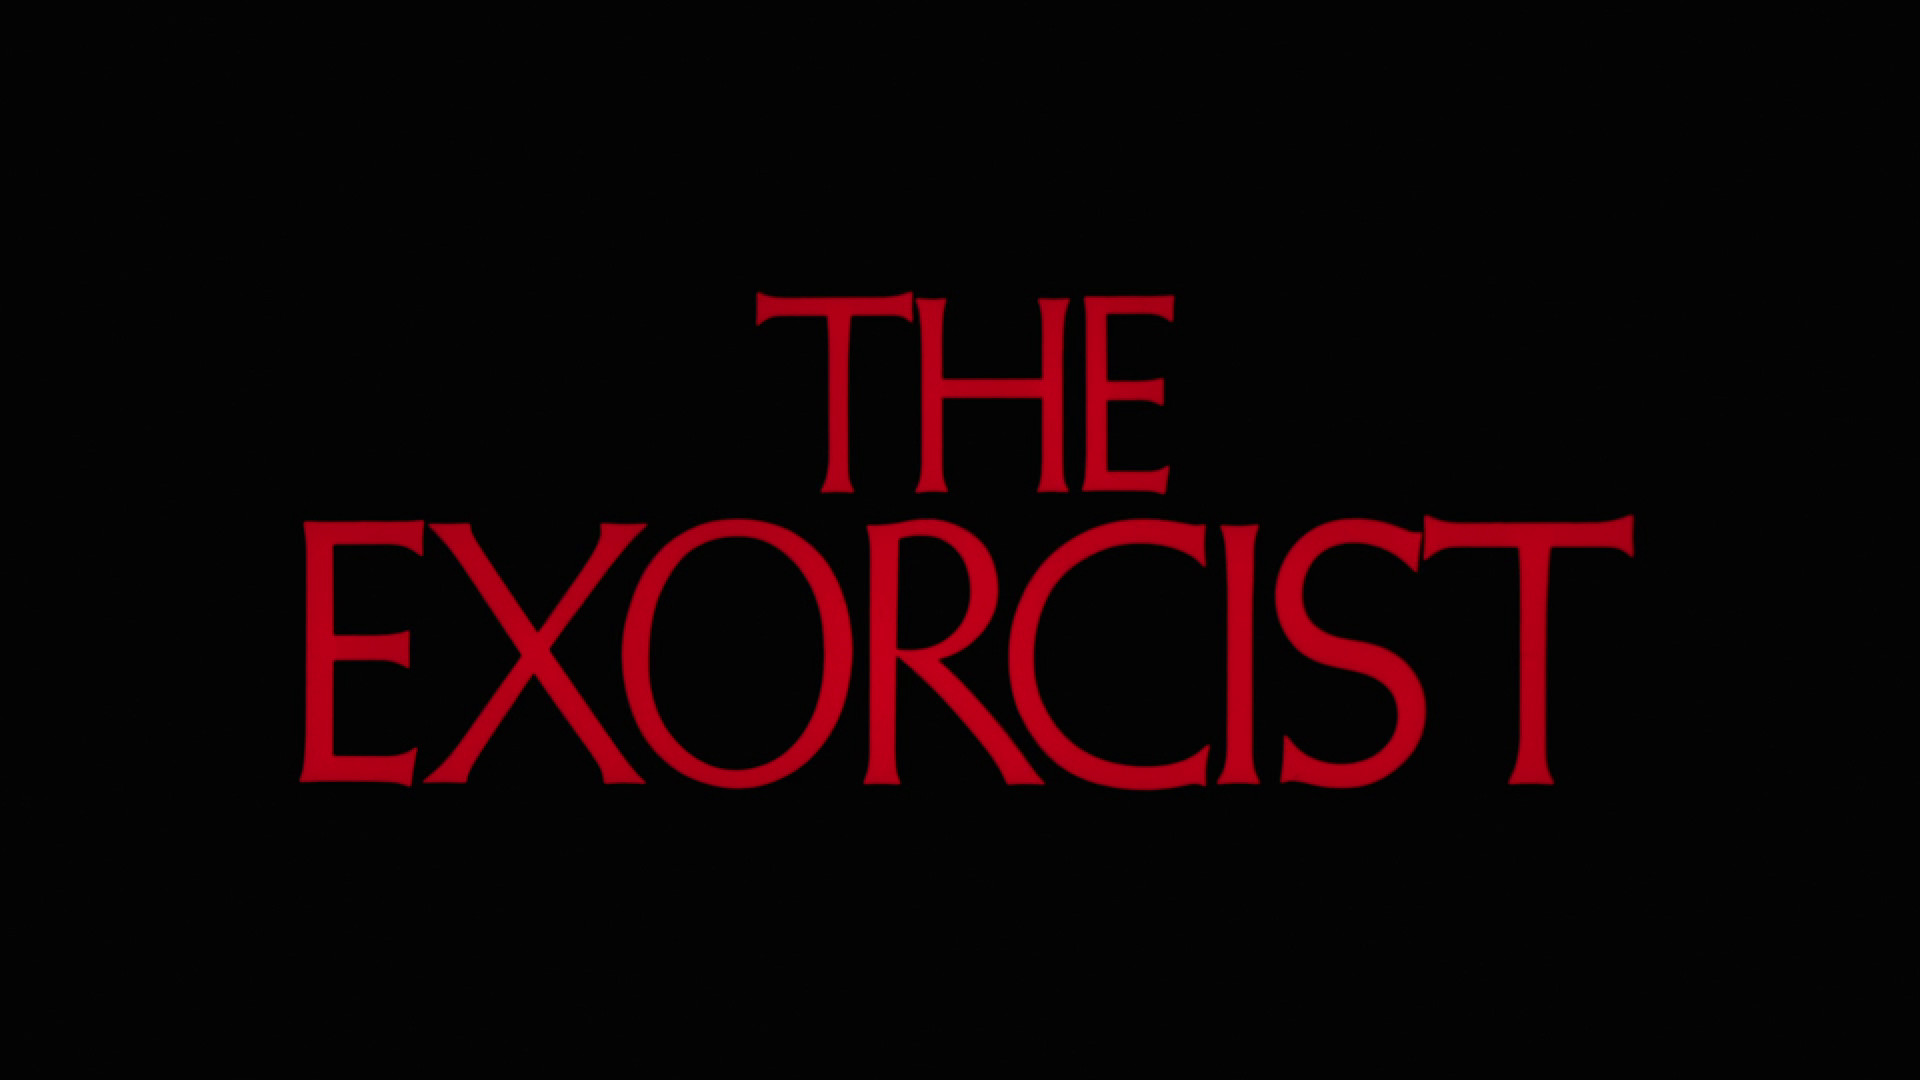 1920x1080 The Exorcist [1973][1080x1920] Need #iPhone #6S #Plus #Wallpaper/  #Background for #IPhone6SPlus? Follow iPhone 6S Plus 3Wallpapers/  #Backgrounds Mu…